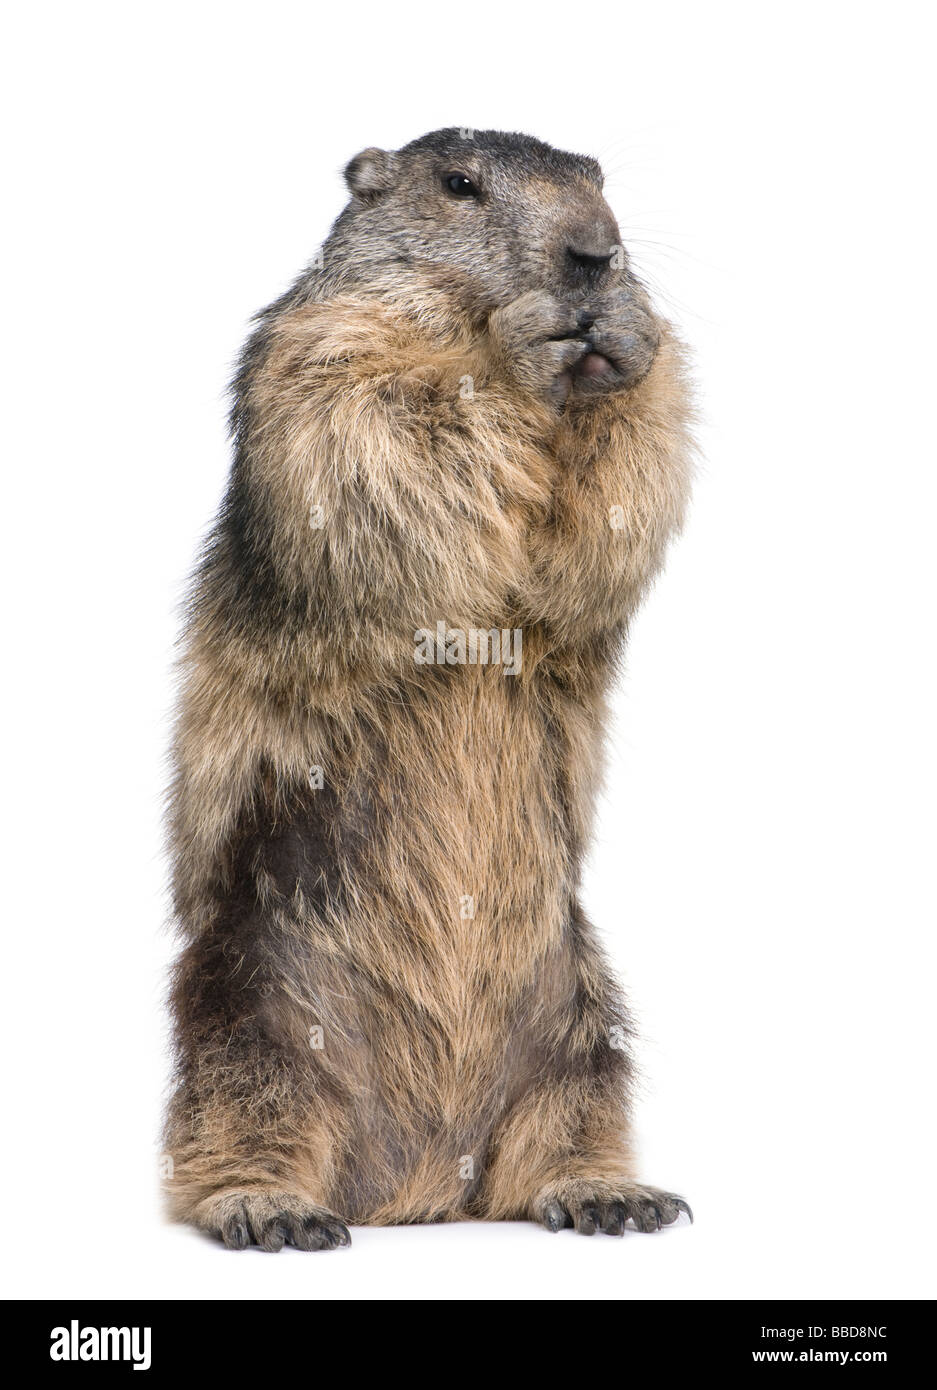 Alpine Marmot Marmota marmota 4 years old in front of a white background Stock Photo